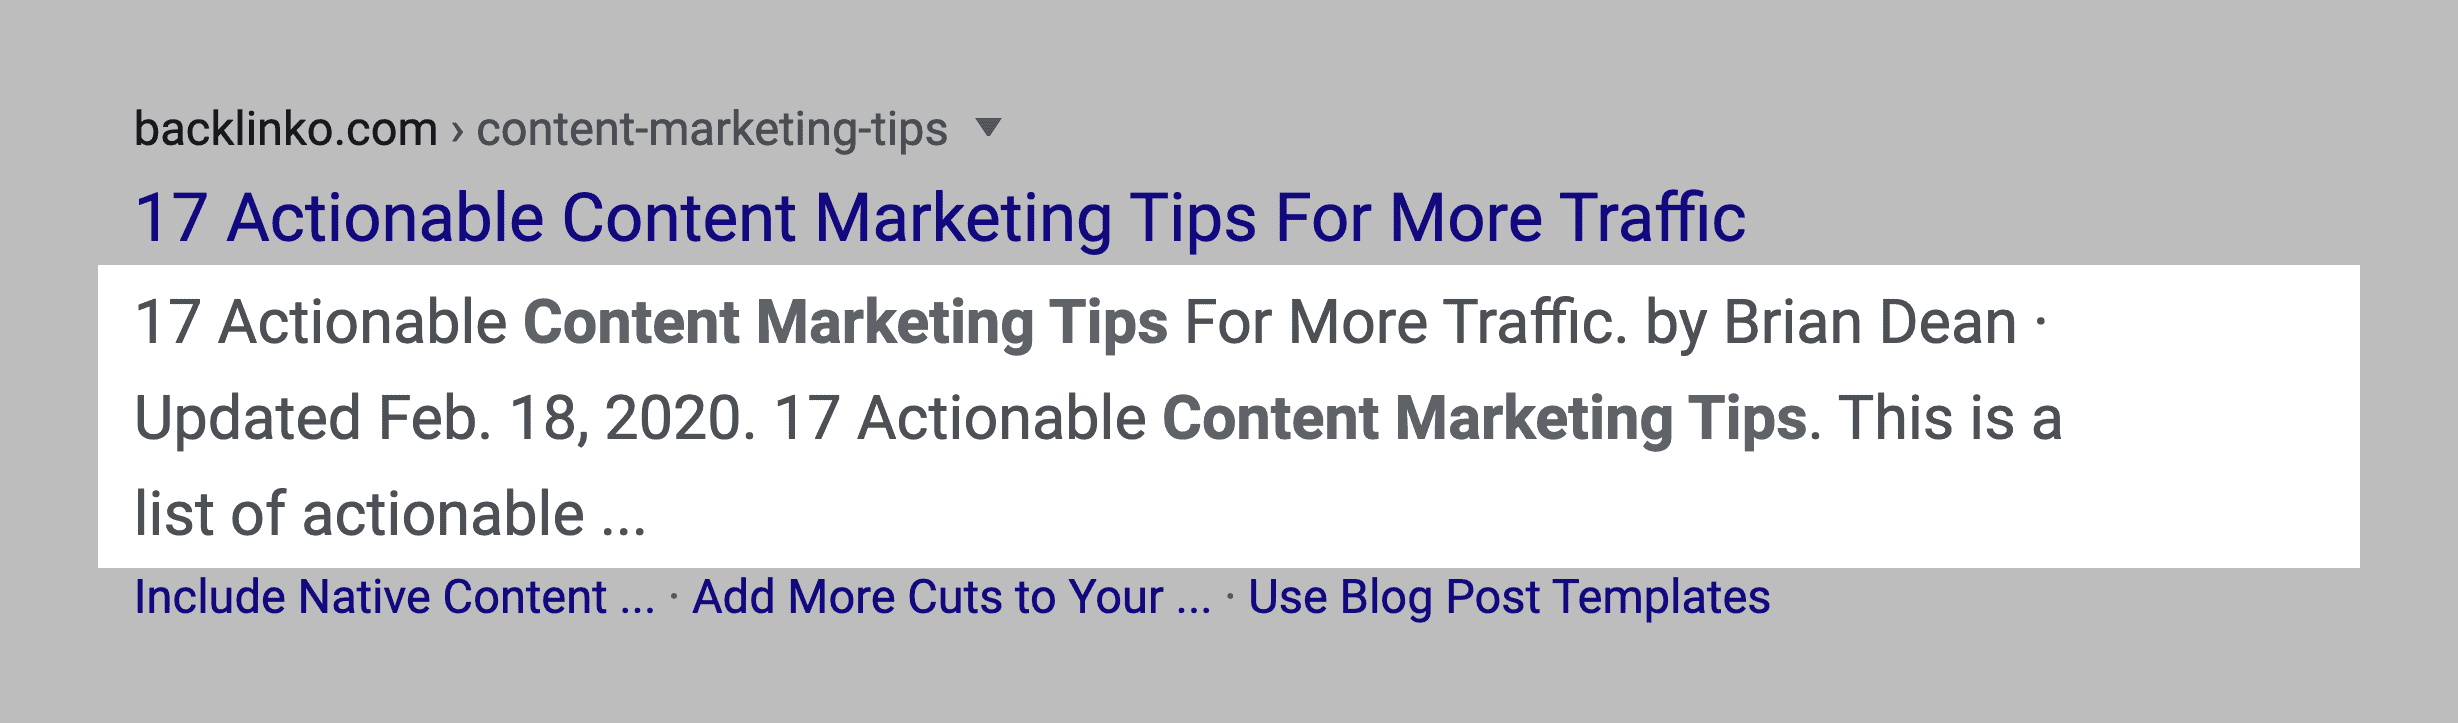 Content marketing tips post – Meta tags in SERPs